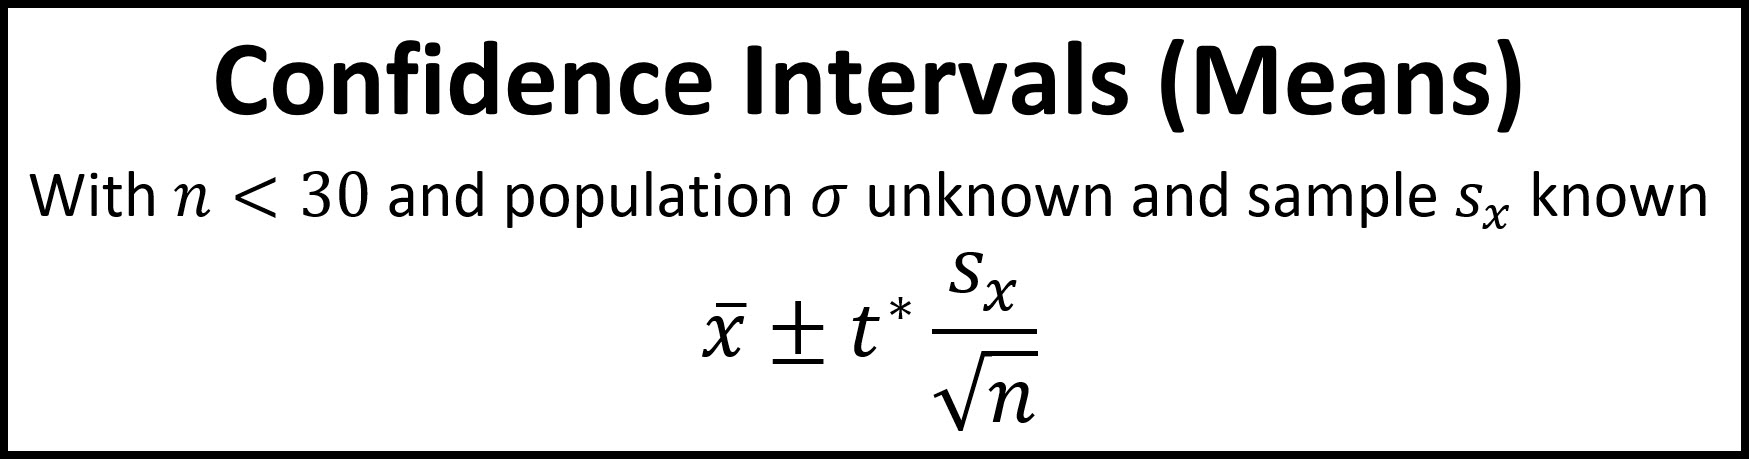 Notes for Confidence Intervals Means Part 2